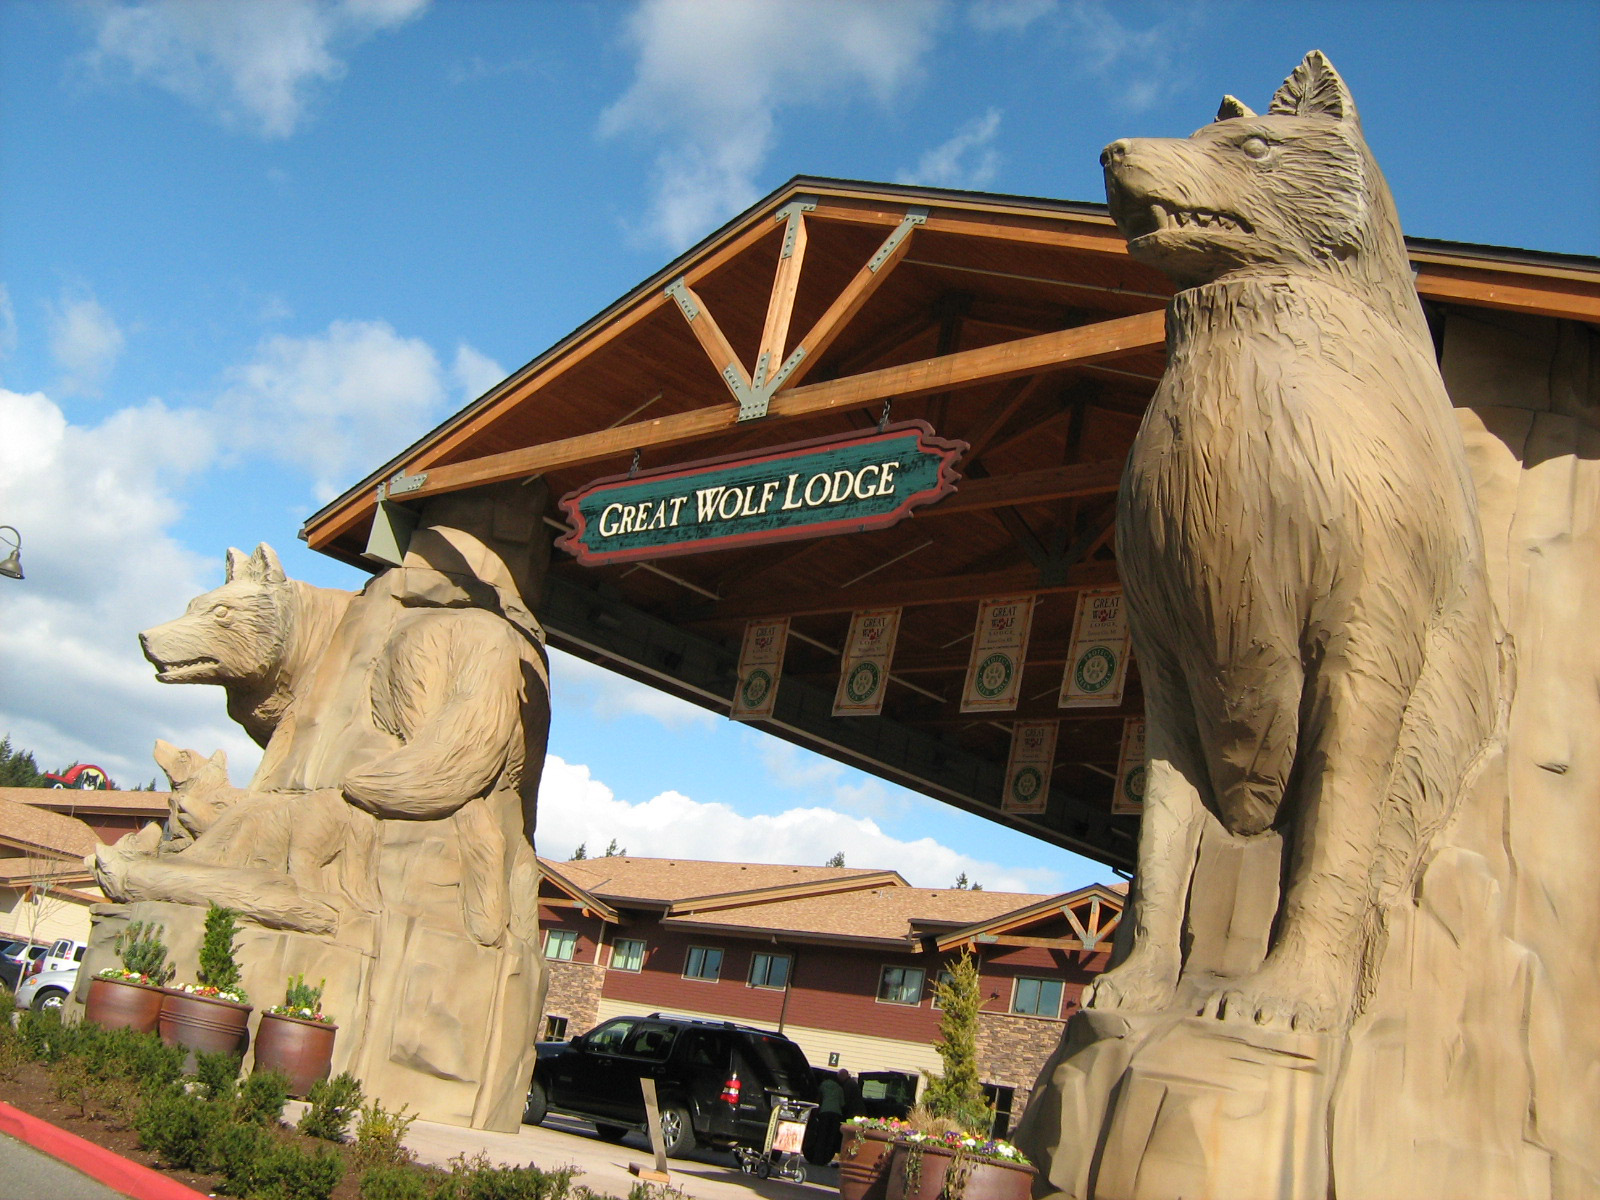 Free The Great Wolf Lodge Washington Water Park, Computer - Great Wolf Lodge Owl - HD Wallpaper 